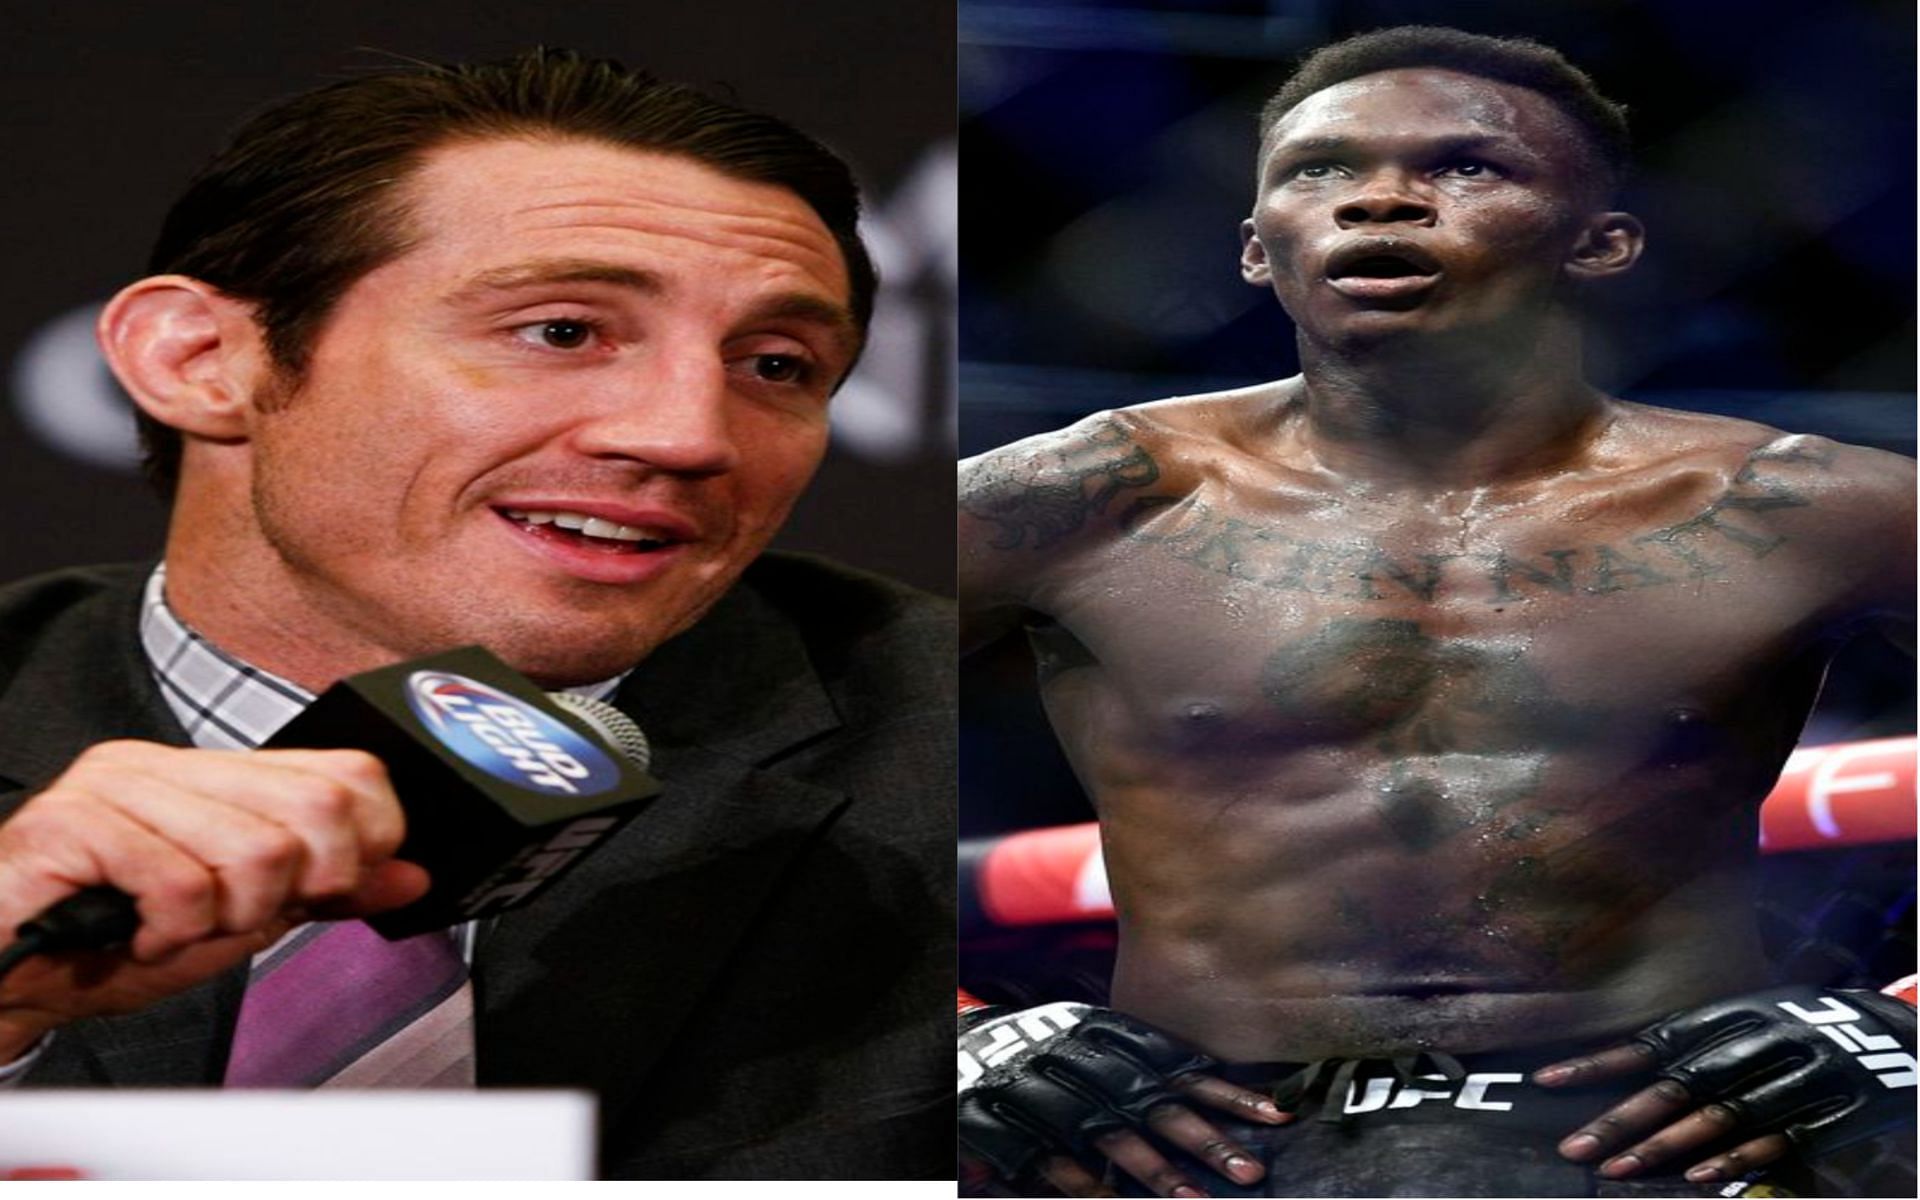 Tim Kennedy (left) and Israel Adesanya (right), [via Esther Lin / Getty Images]